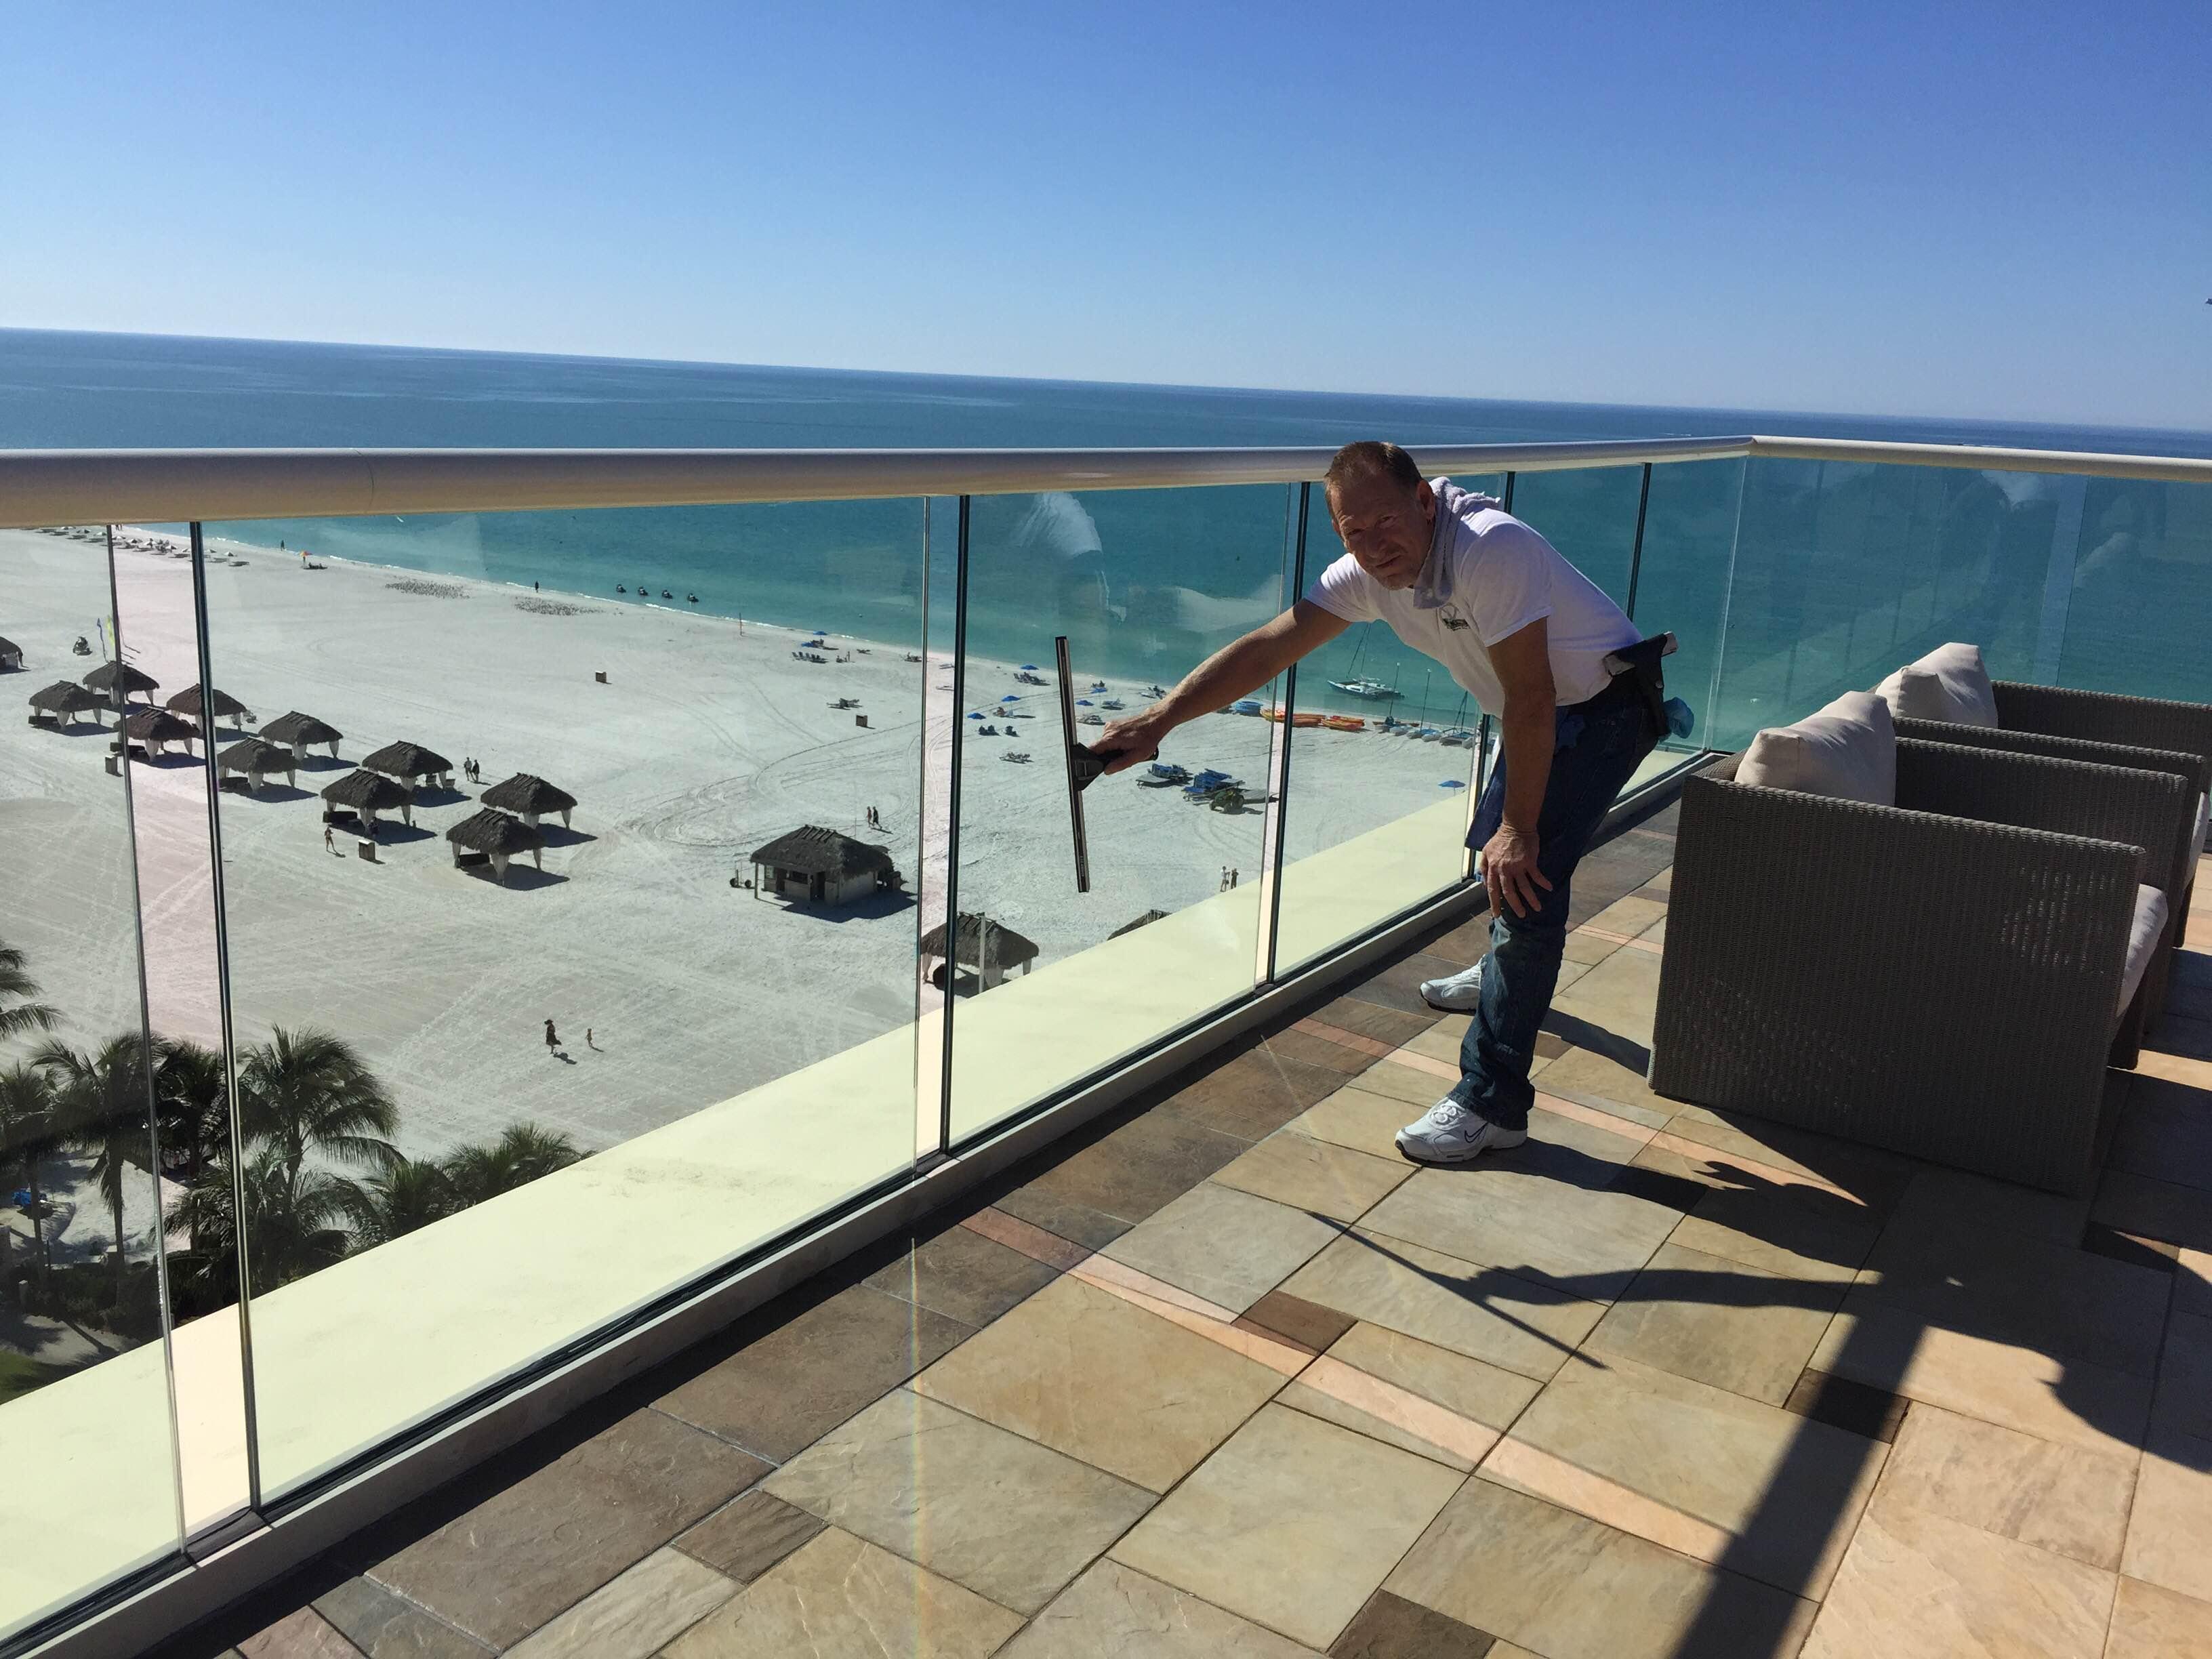 “Clean glass is key! It’s ALL about the view!” 